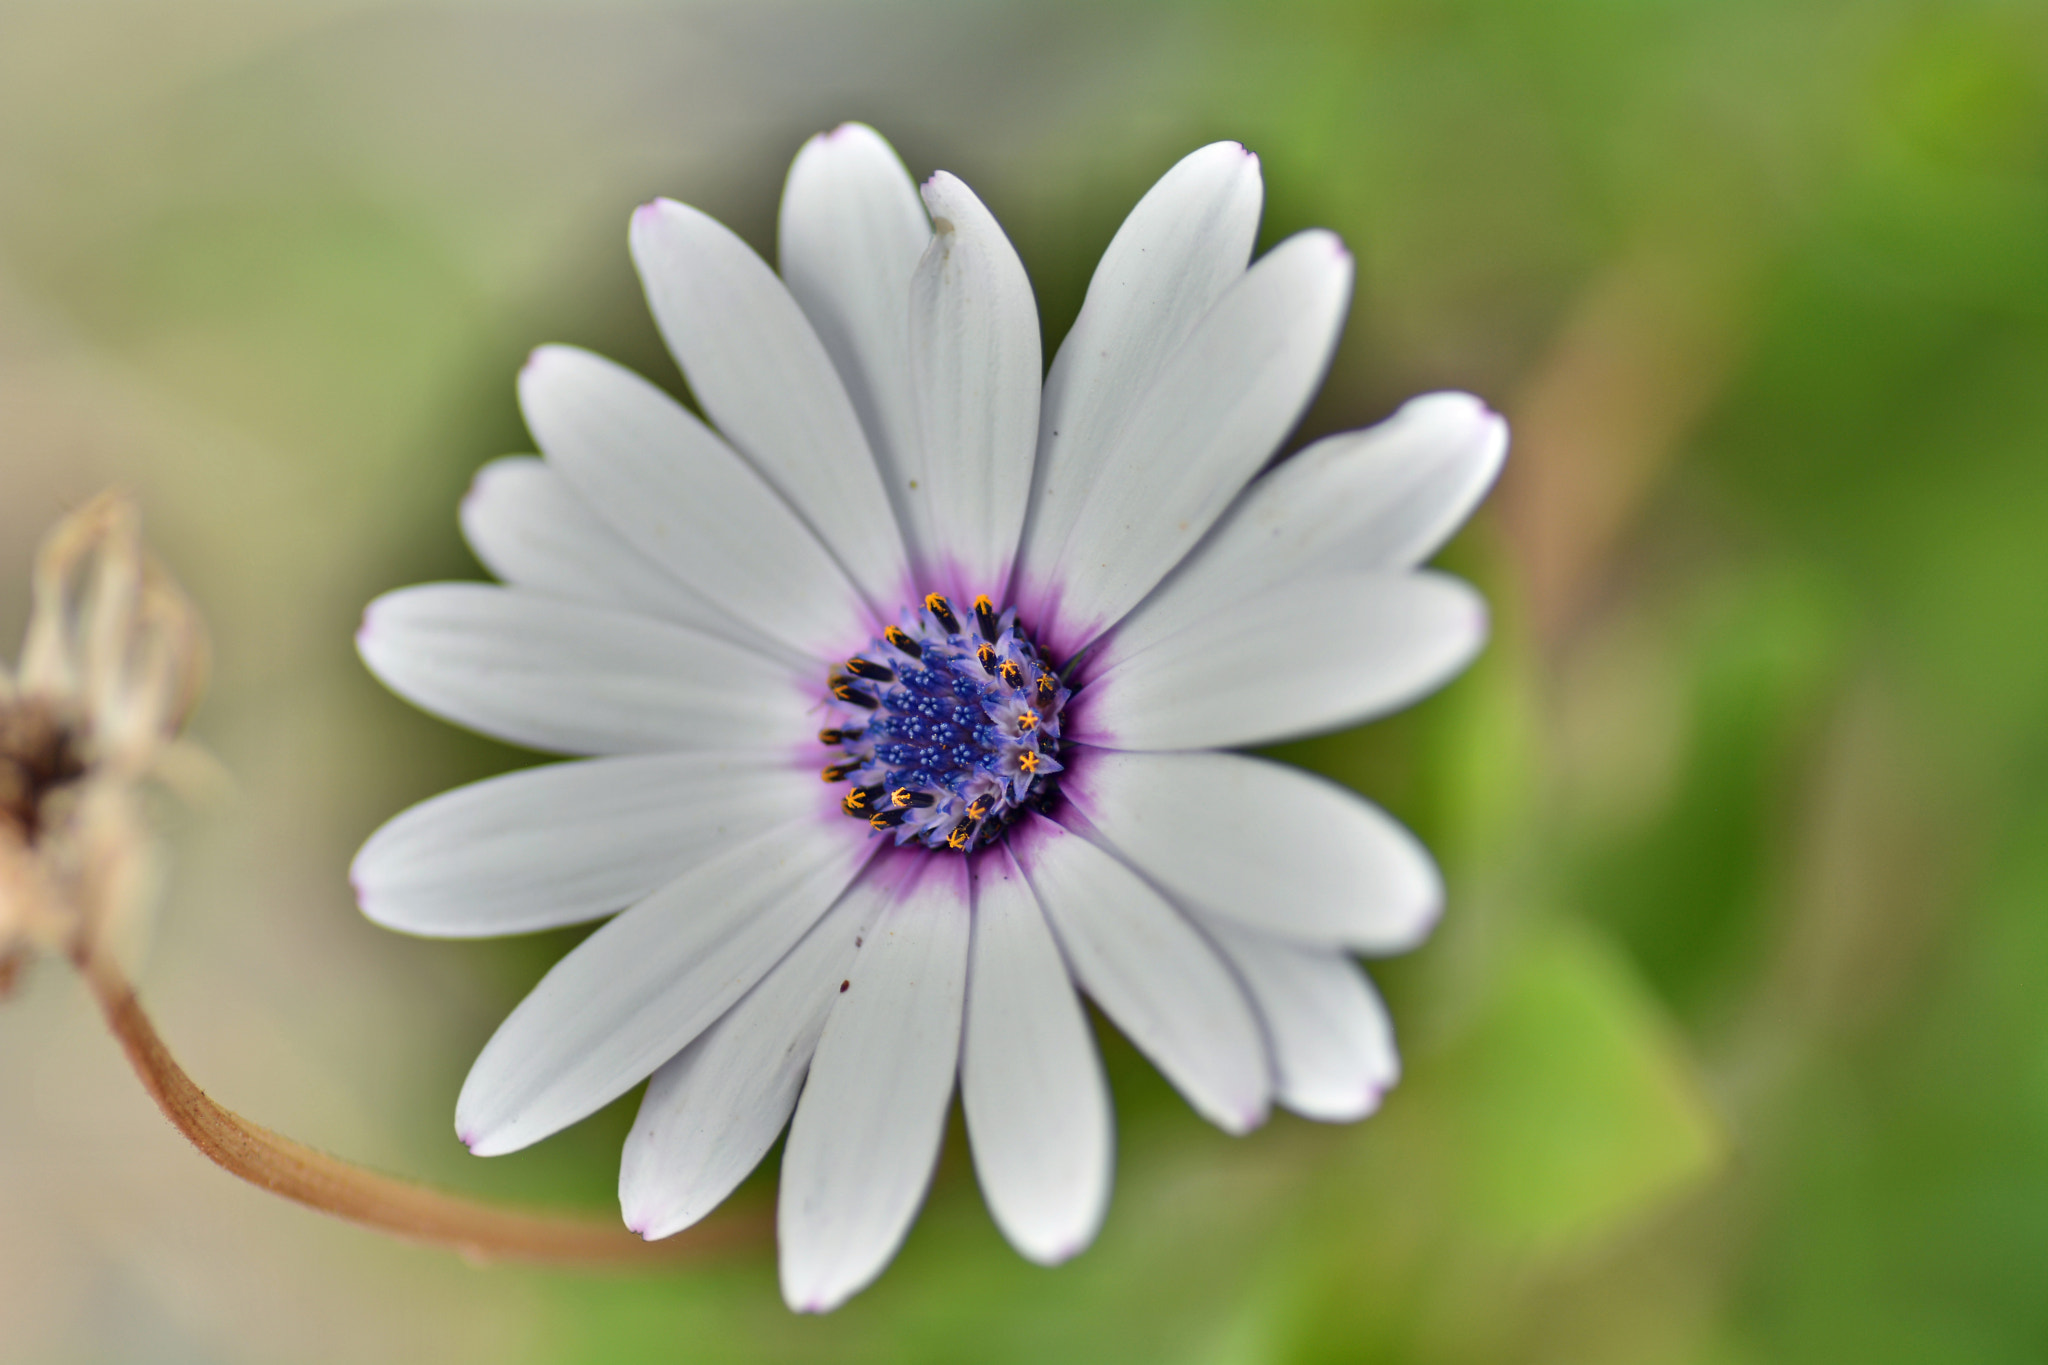 Nikon D7100 sample photo. In flower photography